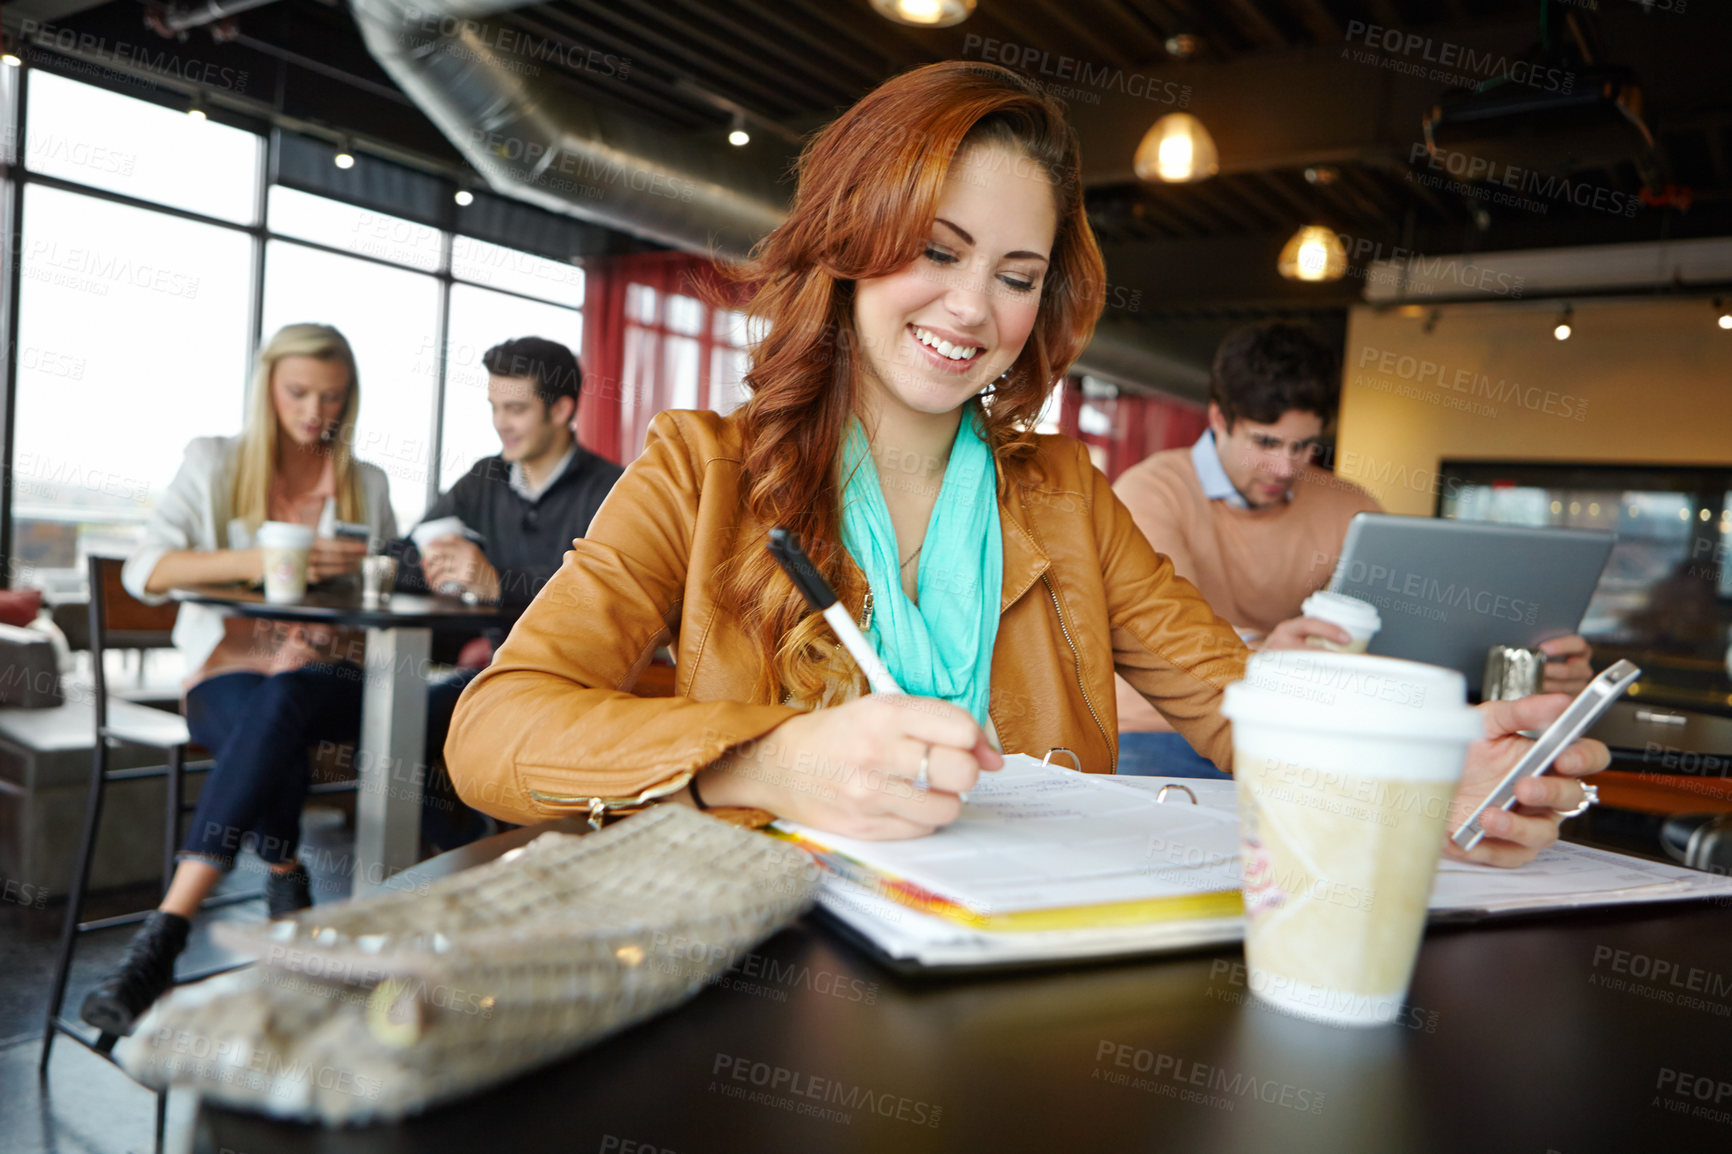 Buy stock photo A beautiful young university student using her smartphone in a coffeee shop while studying